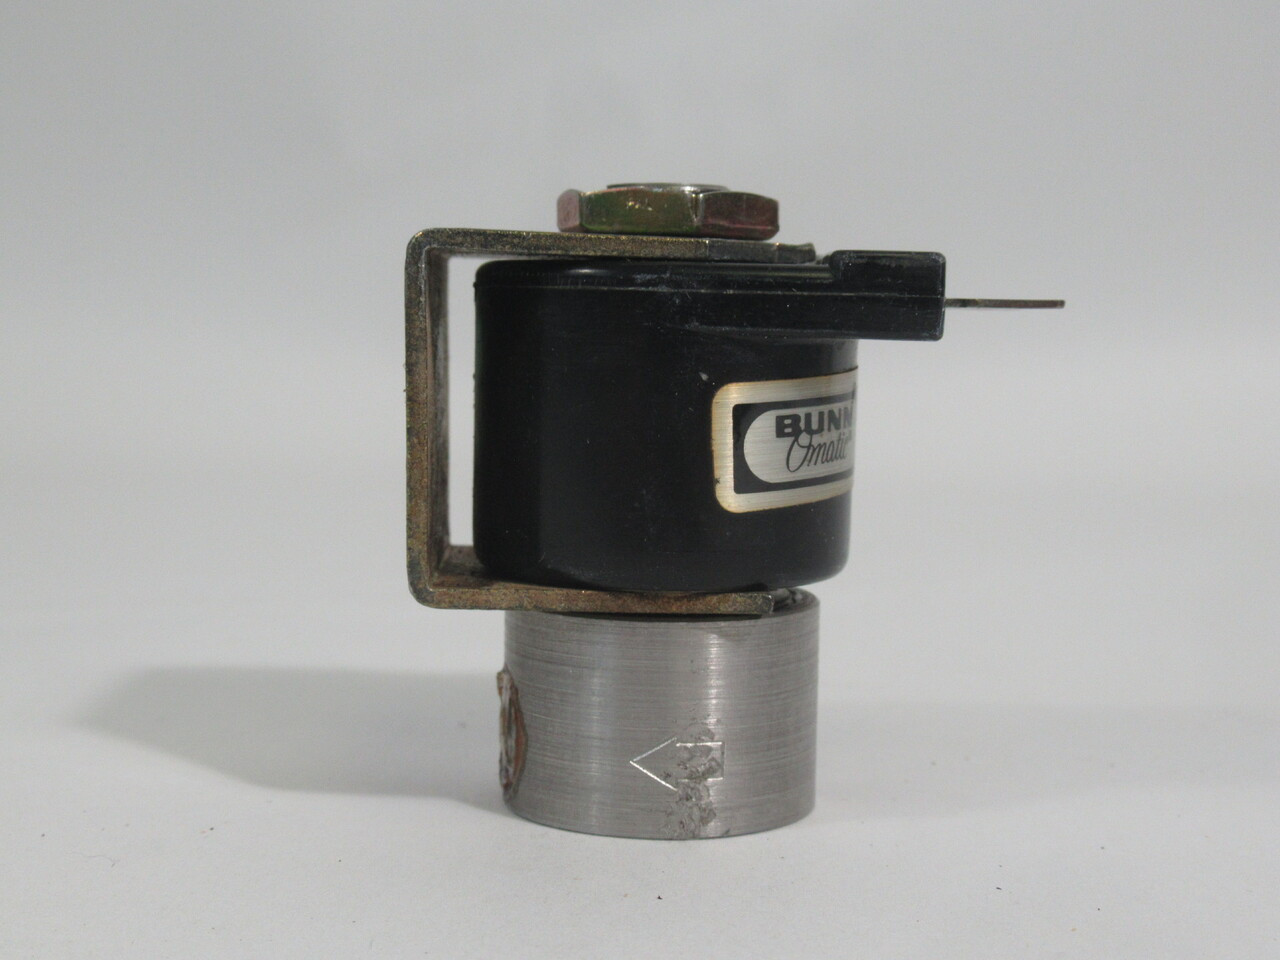 Bunn-O-Matic 1085 Water Solenoid Valve 120V 50Hz 10W USED